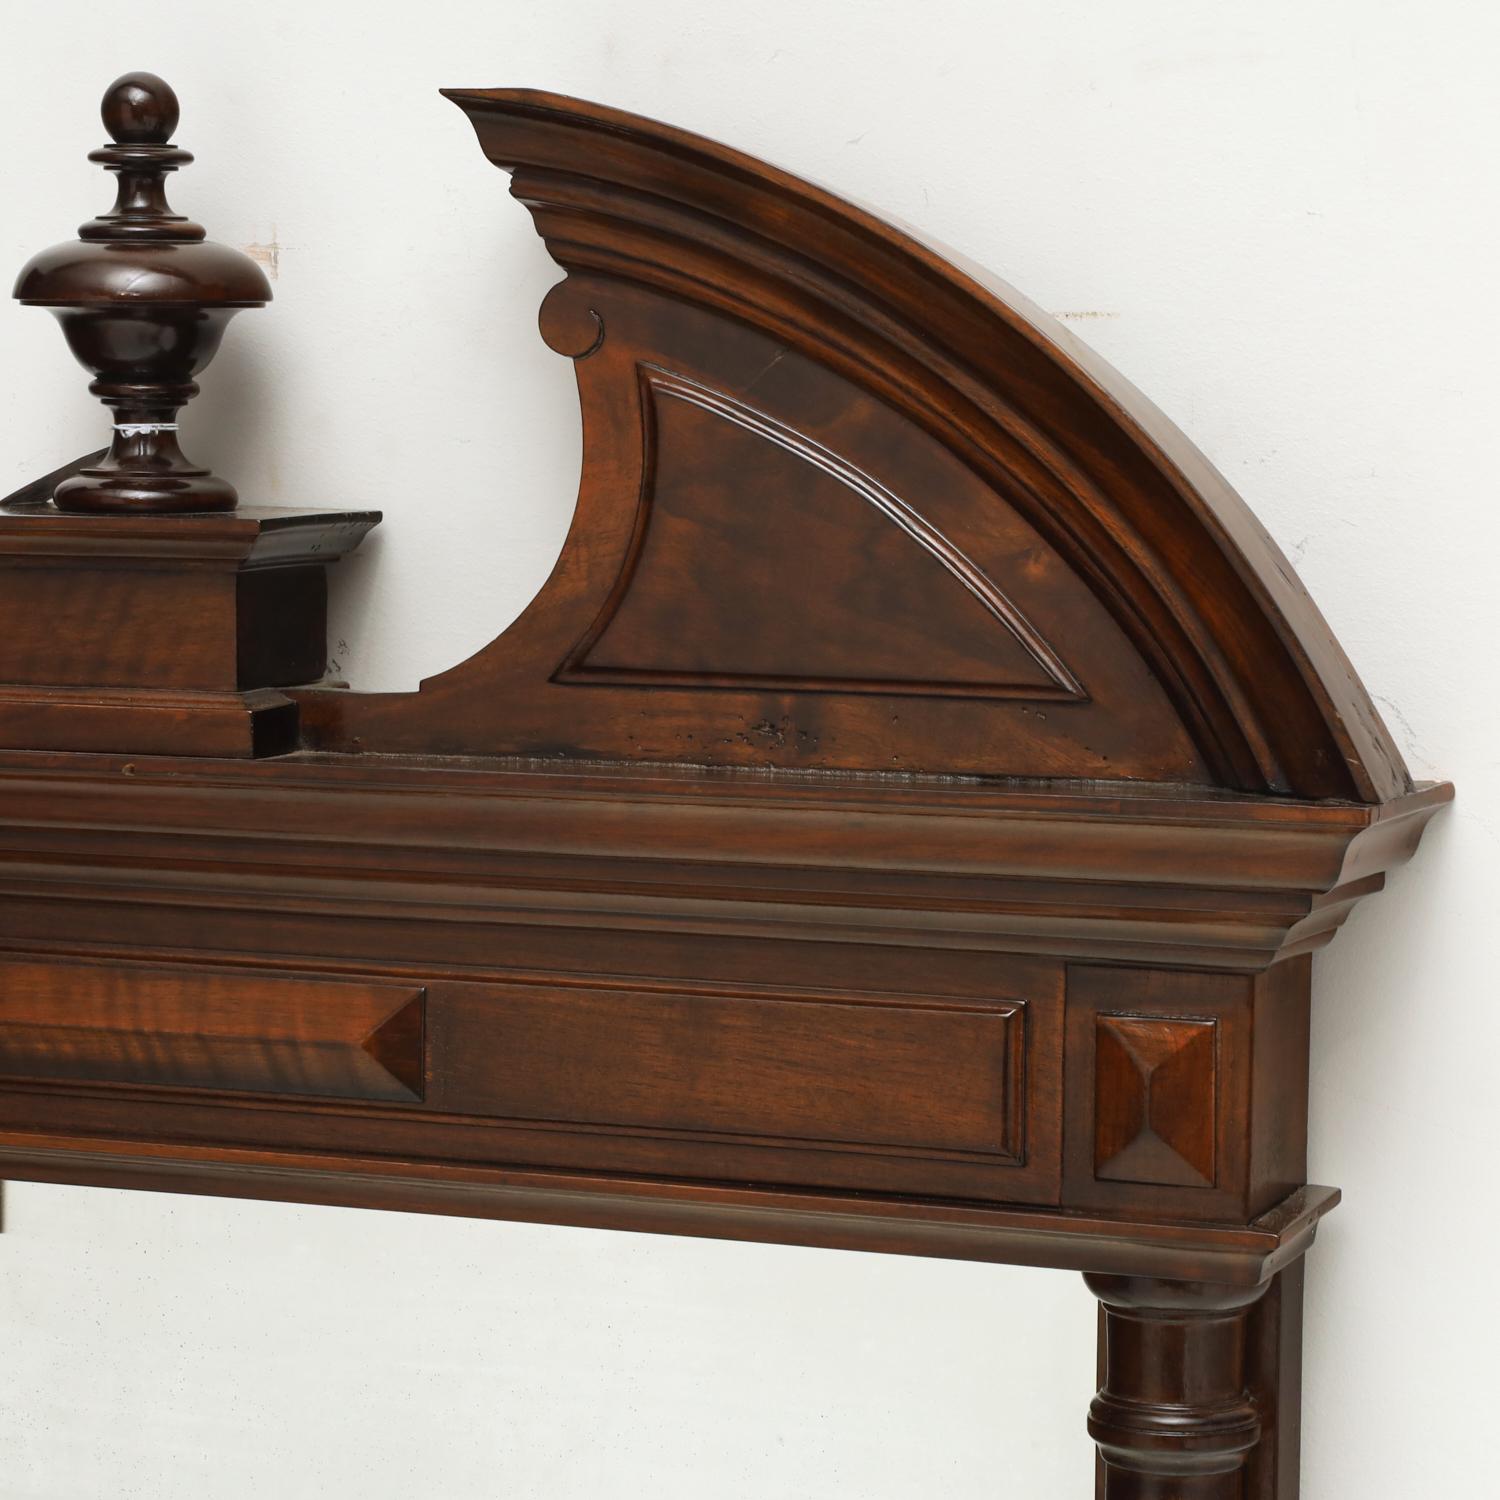 19th/20th C., large handsome Victorian walnut pier mirror. Open pediment top with central spire, carved baluster frame, beveled glass, no visible marks

Dimensions:
62